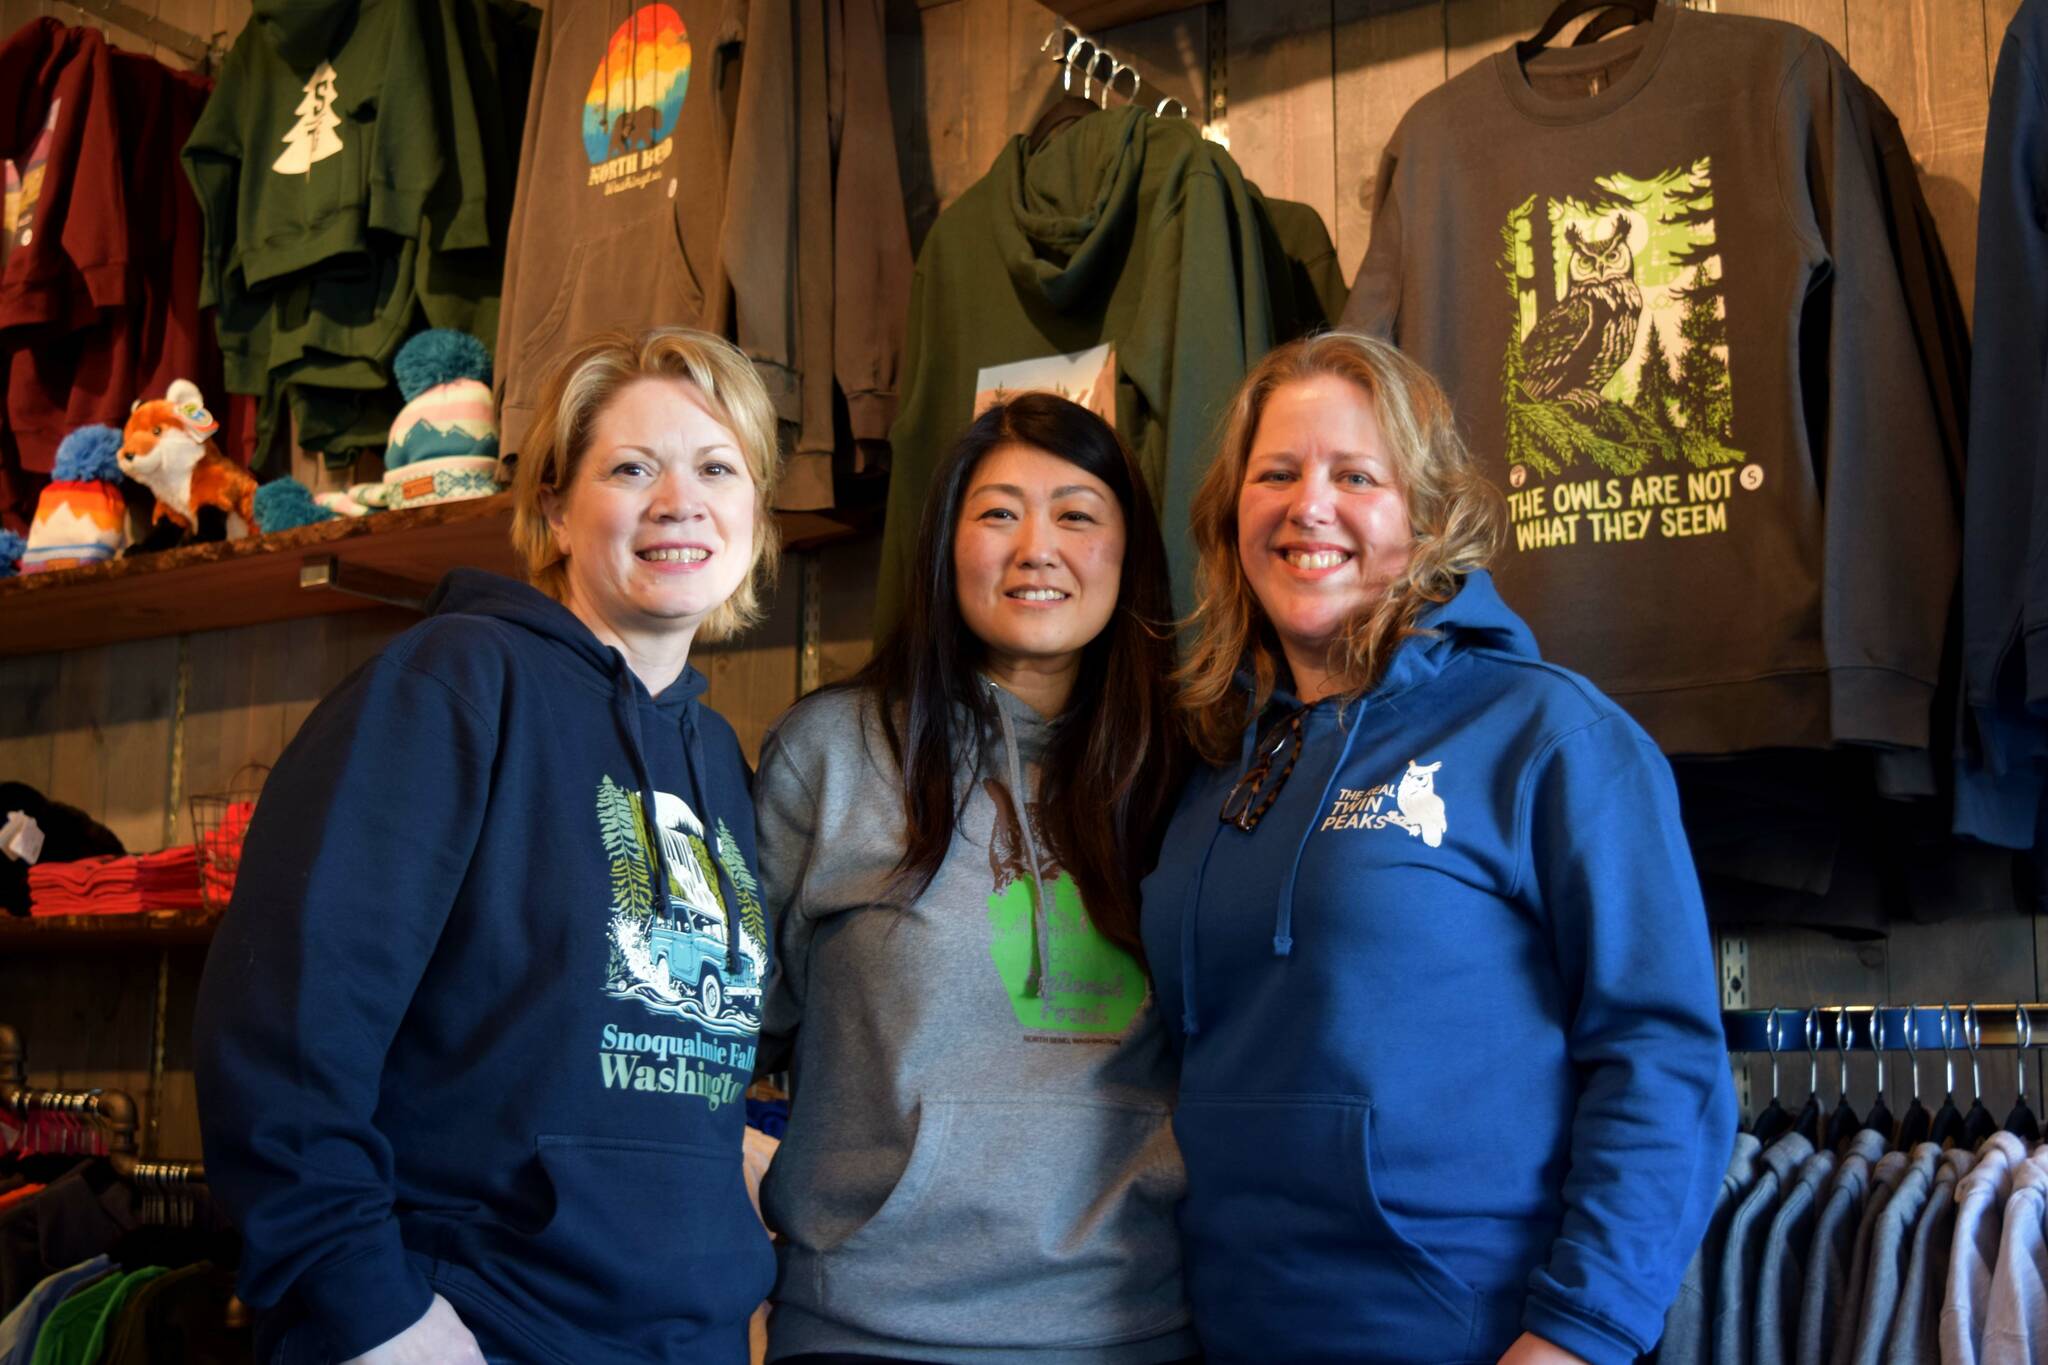 Owners of North Bend Trading Company. From left: Heather Dean, Julie Chung, Cheri Buell. Photo Conor Wilson/ Valley Record.